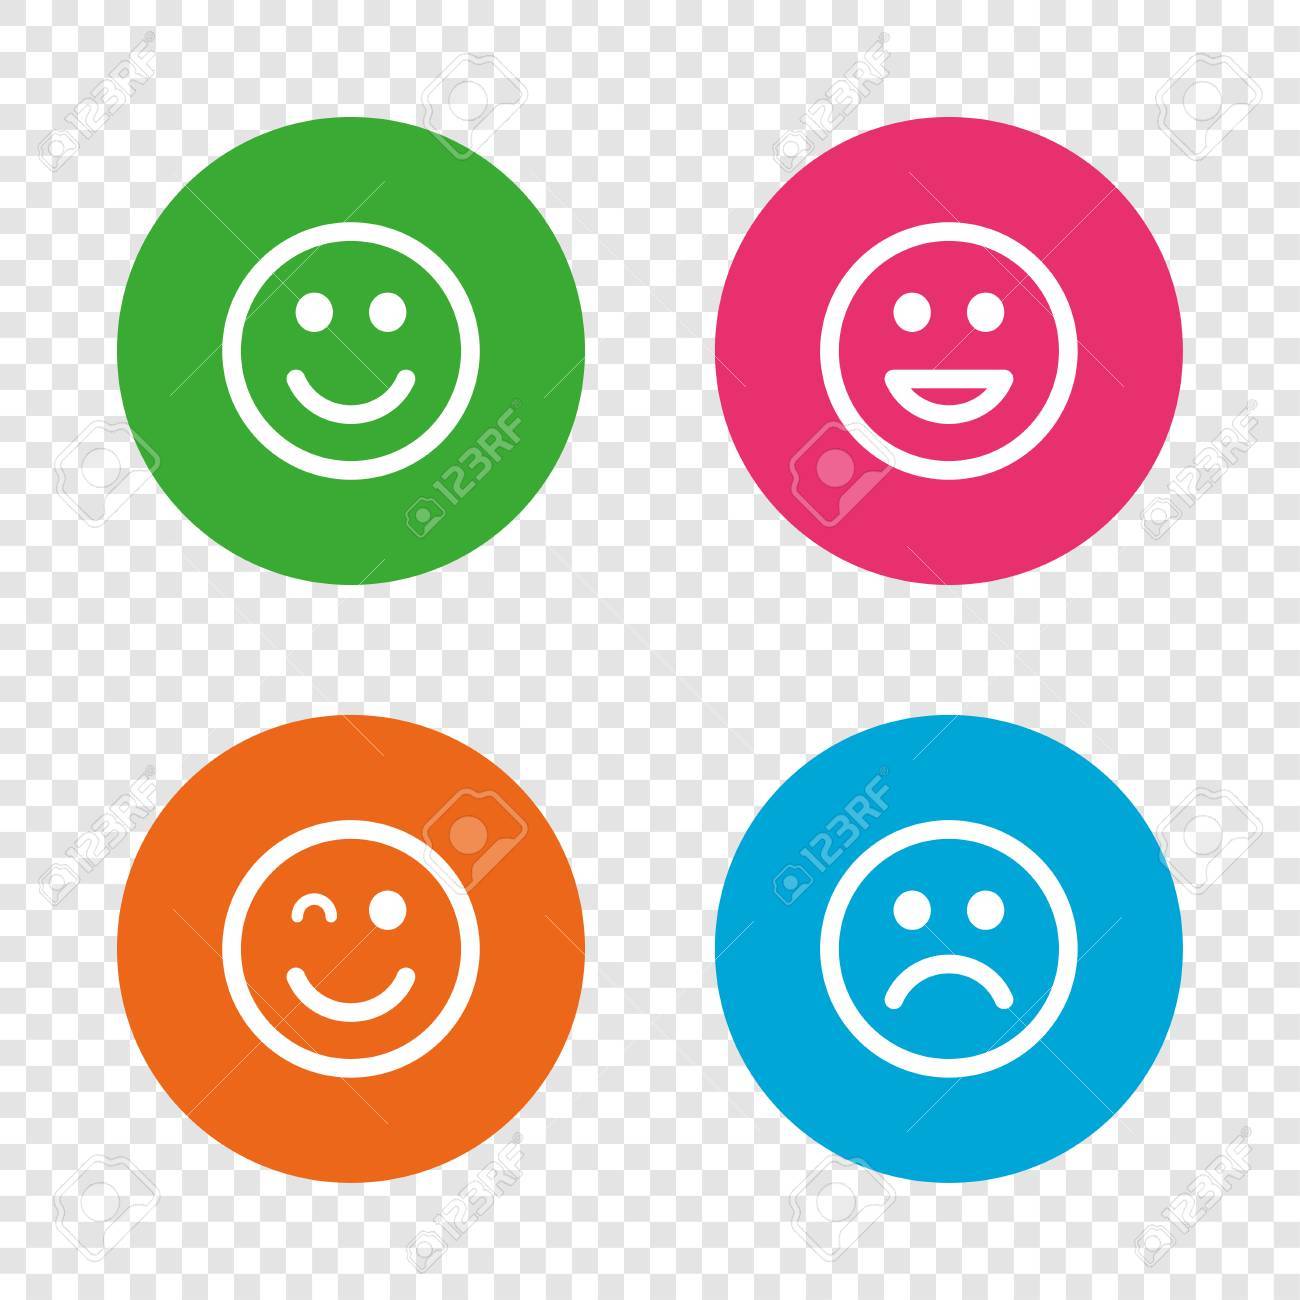 Human smile face icons happy sad cry Royalty Free Vector